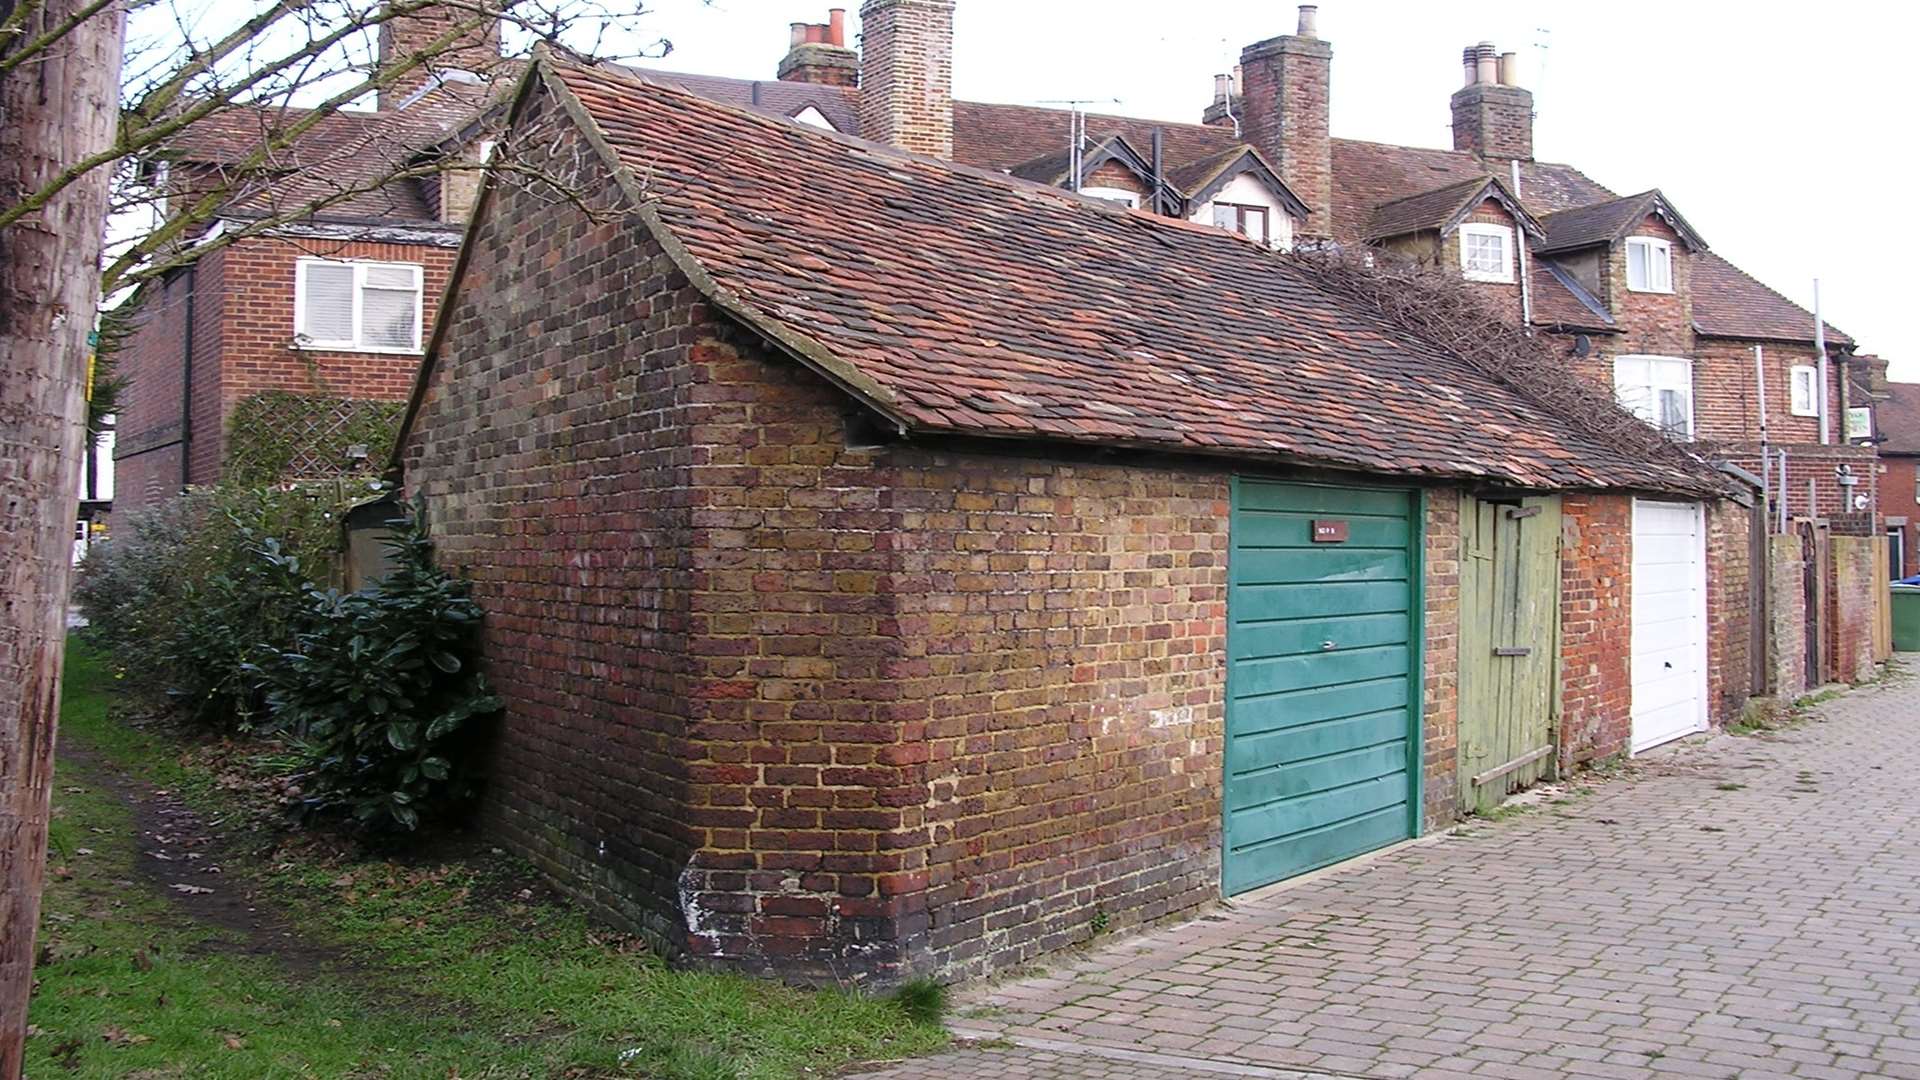 The rear view of the alleyway, taken in 2004